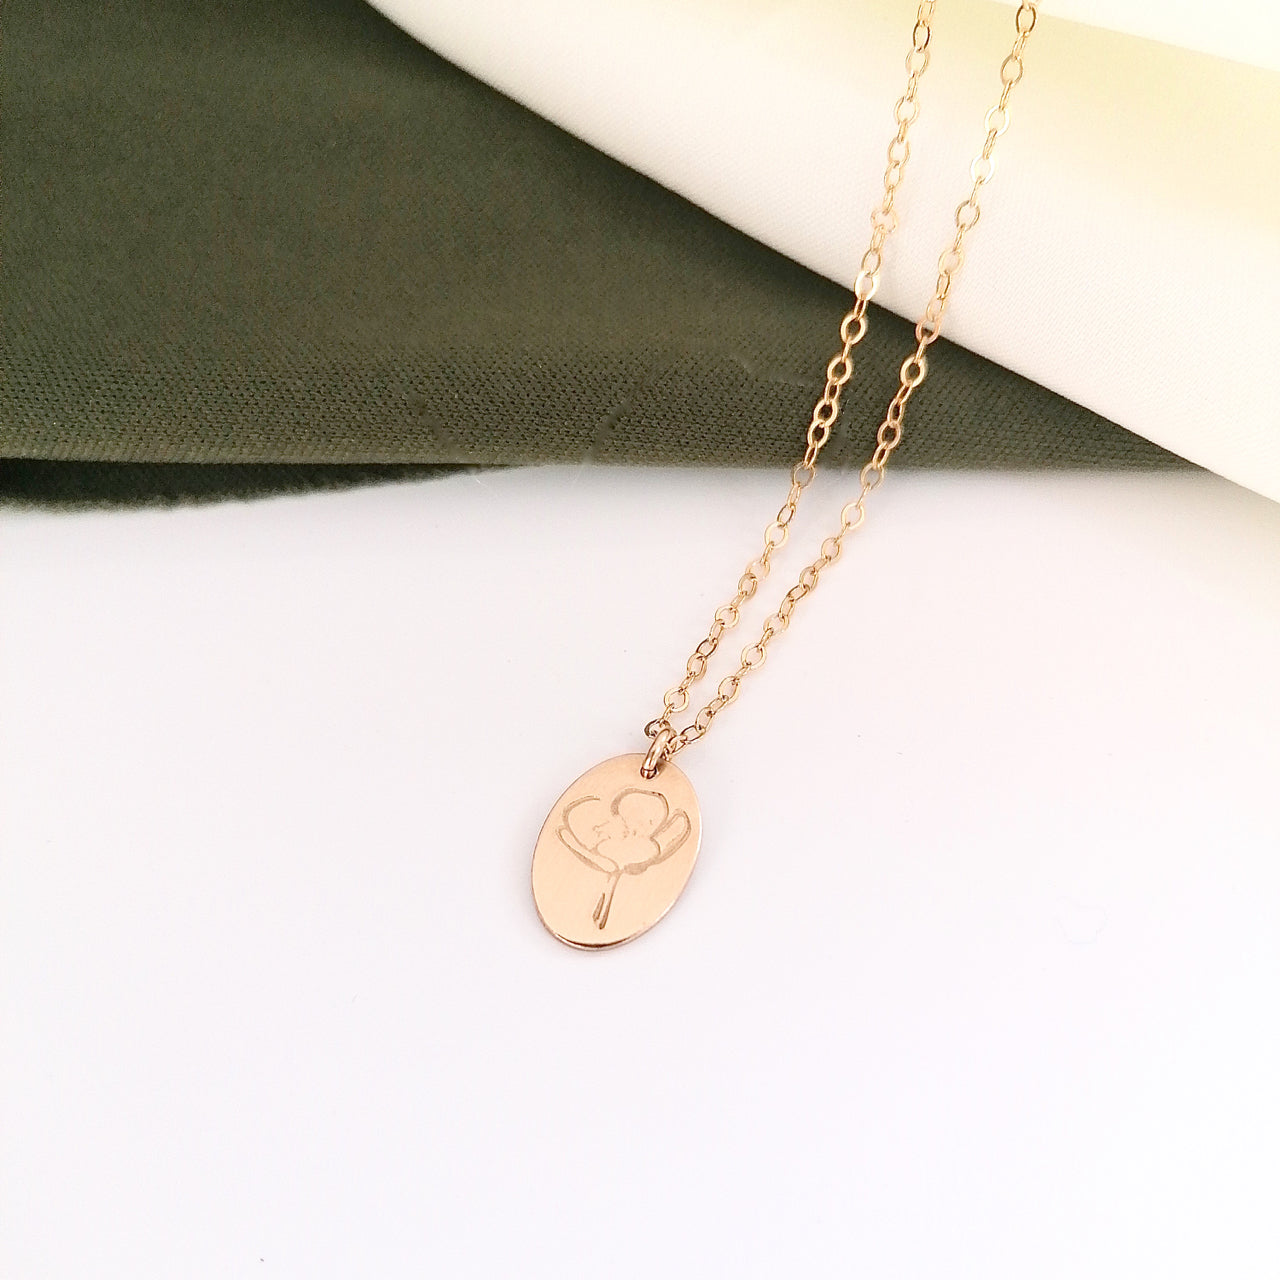 Gold Buttercup necklace